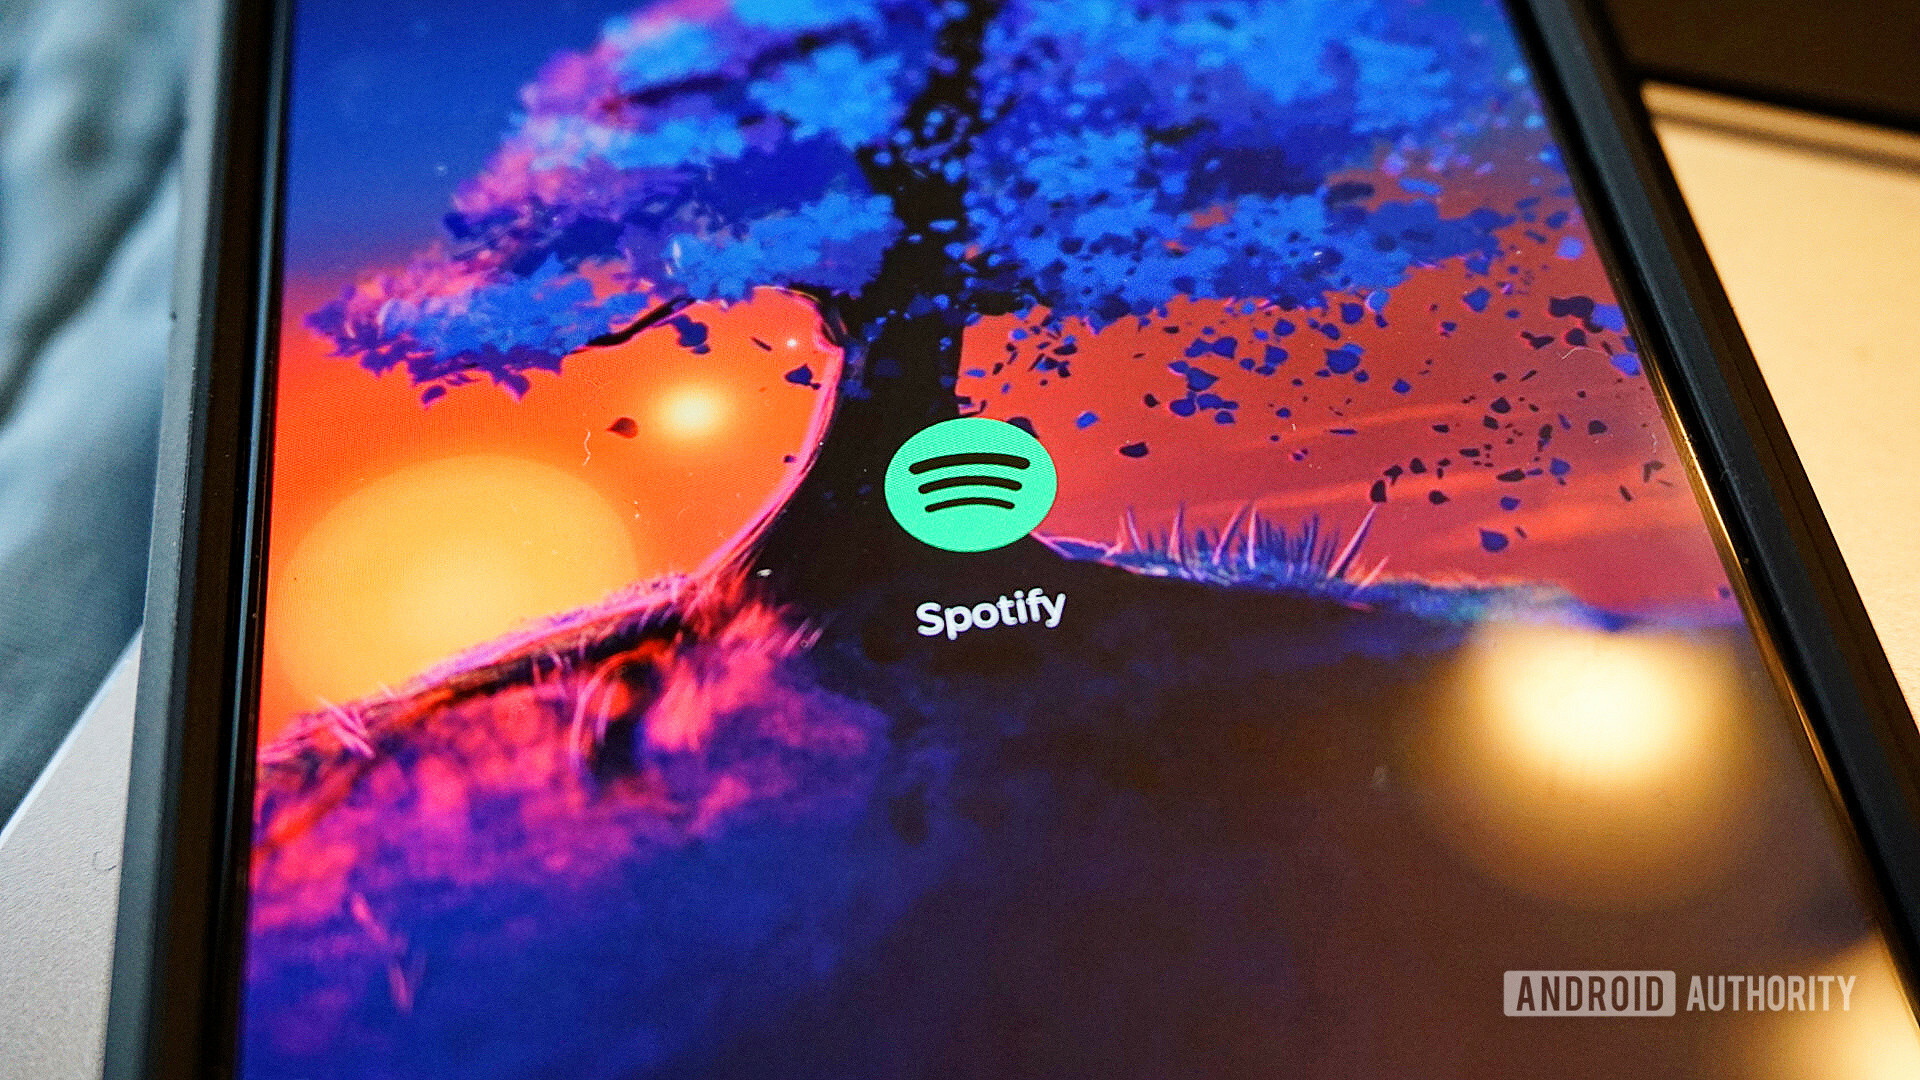 Spotify icon on a mobile device